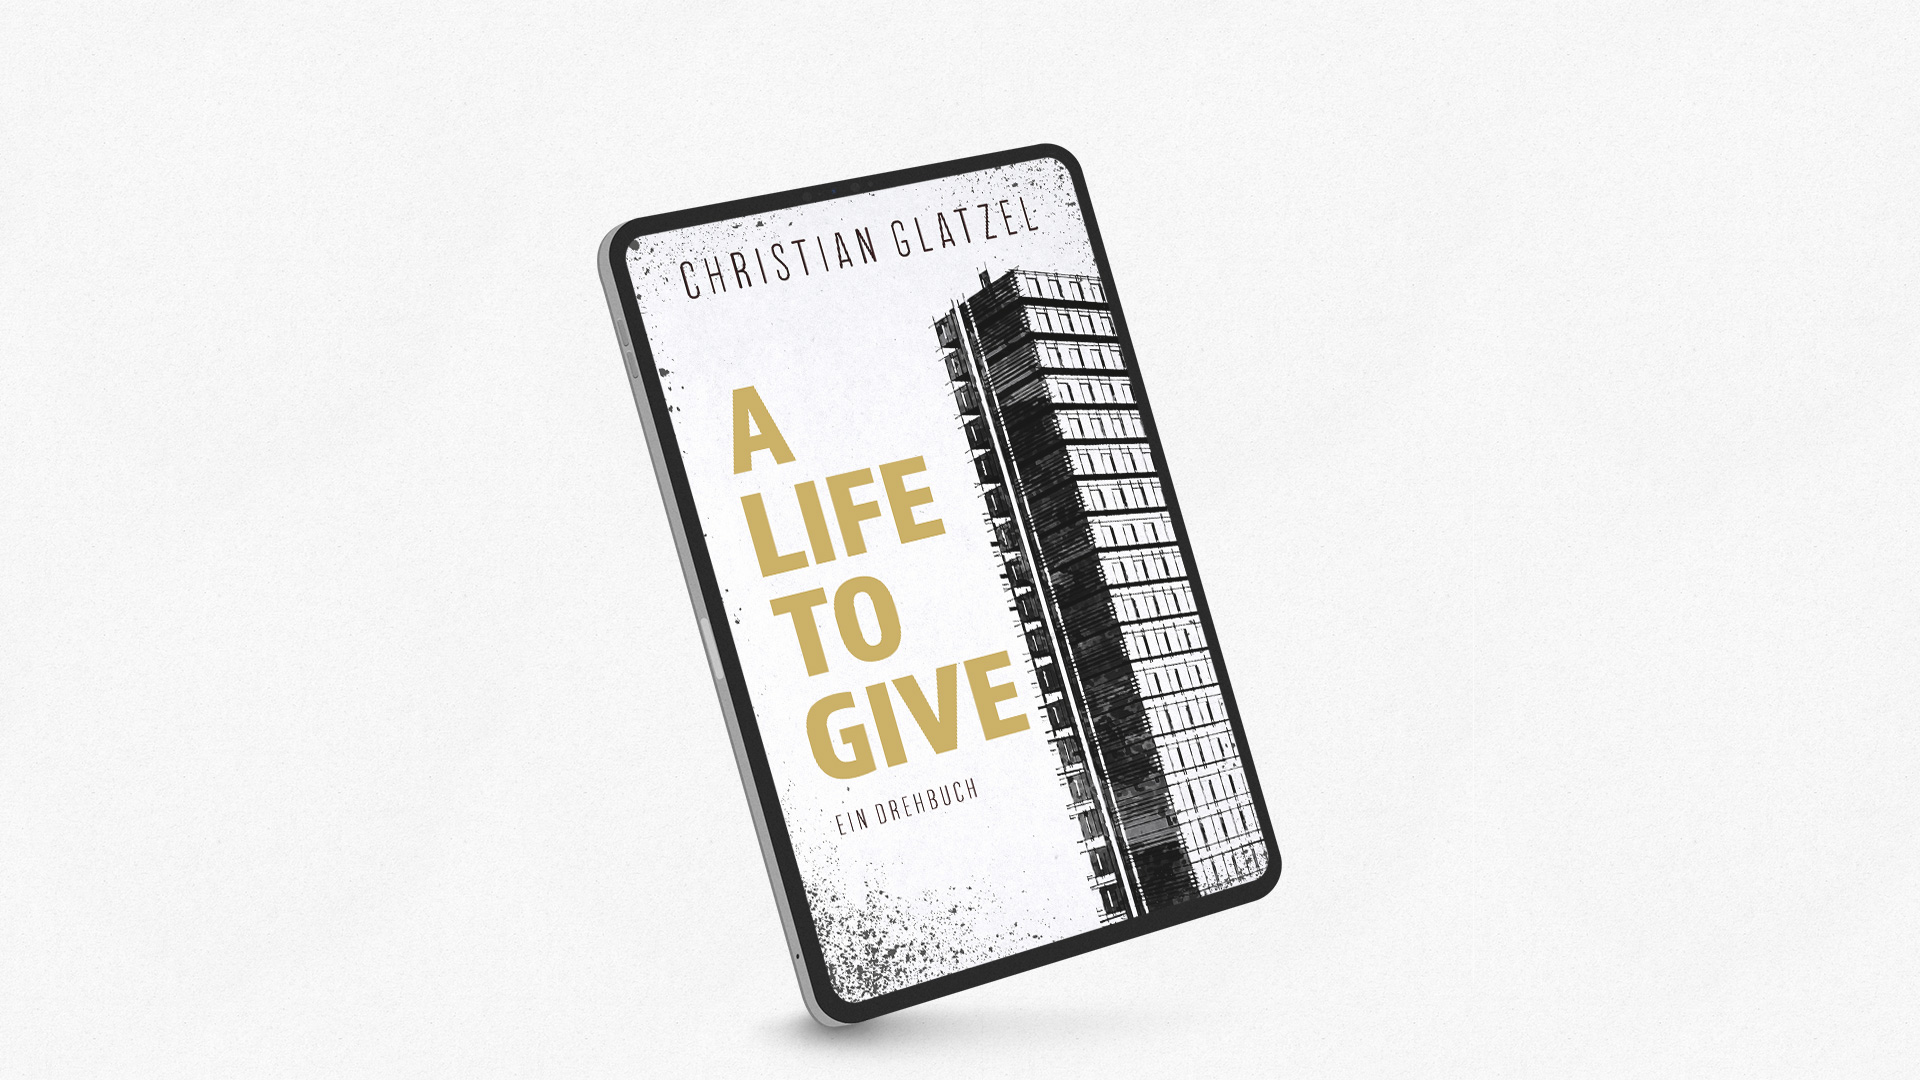 A LIFE TO GIVE